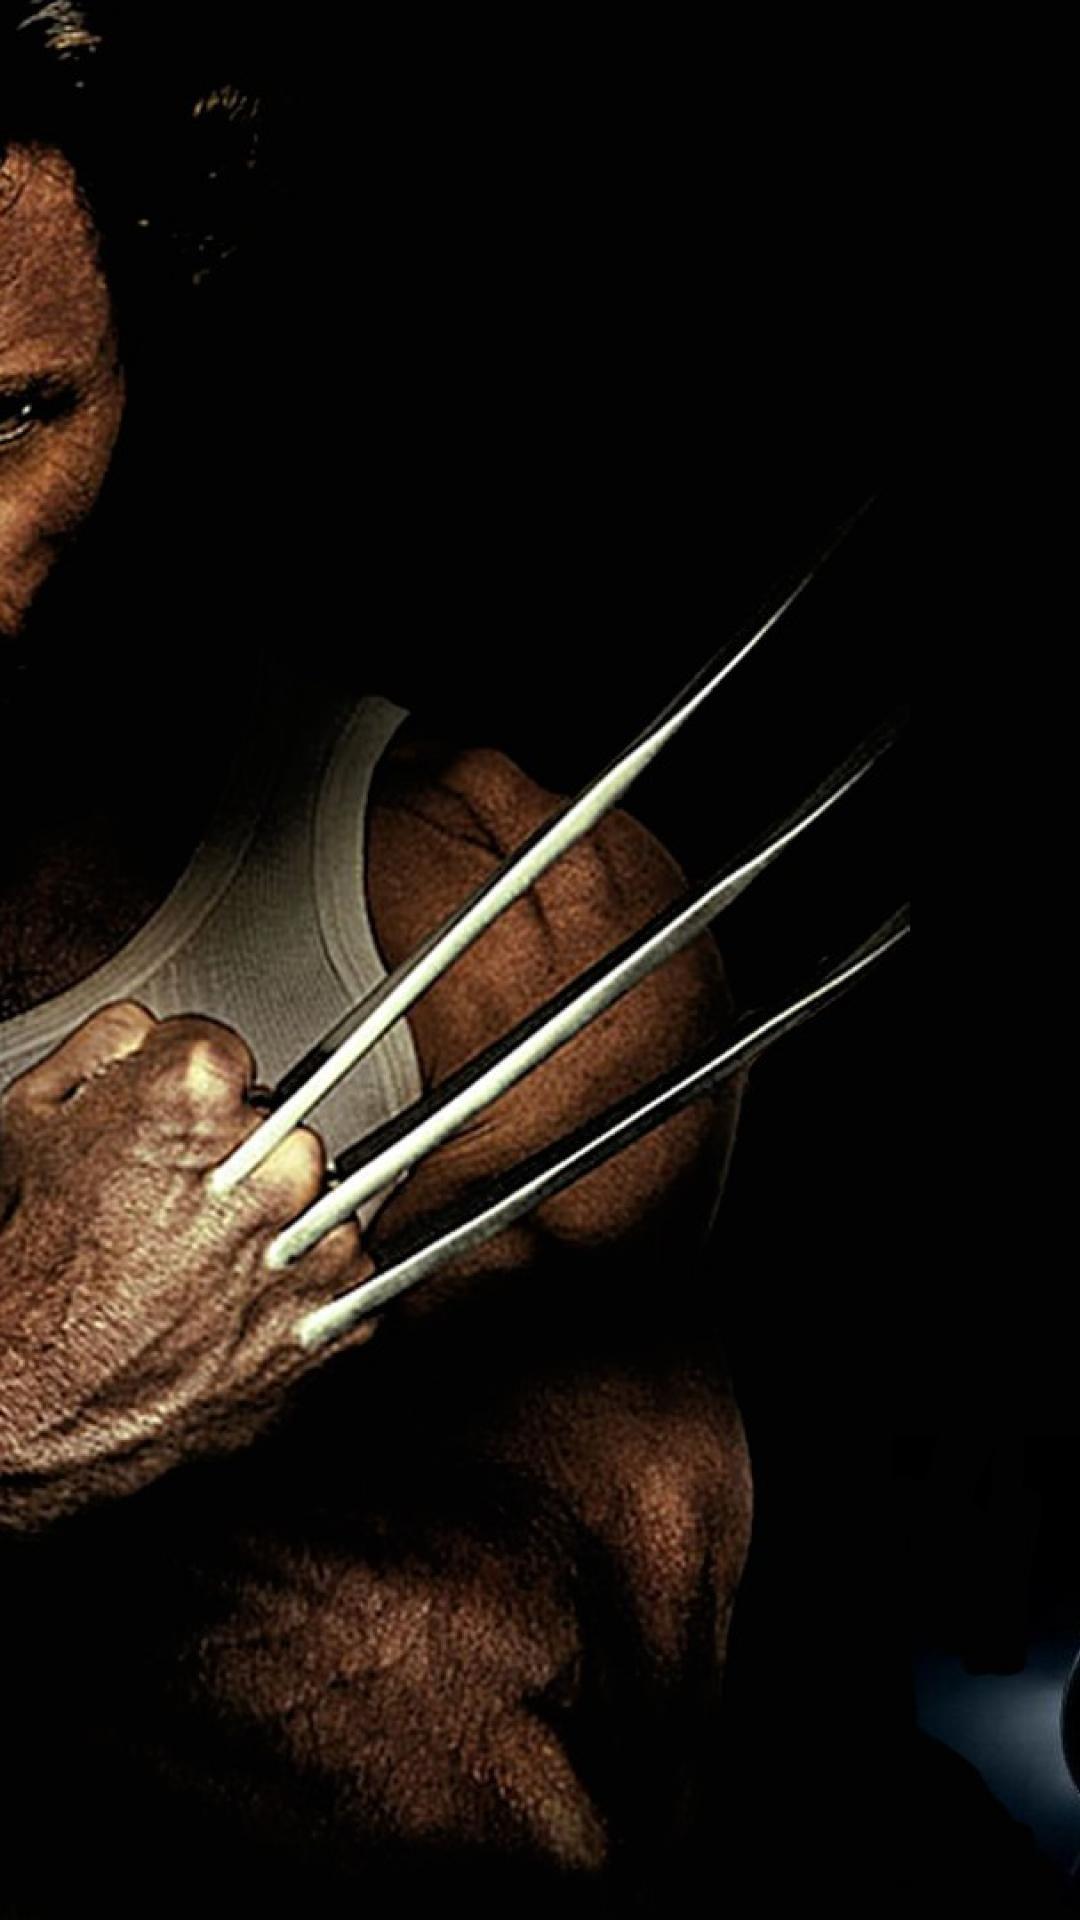 4k iPhone Wolverine Wallpapers - Wallpaper Cave